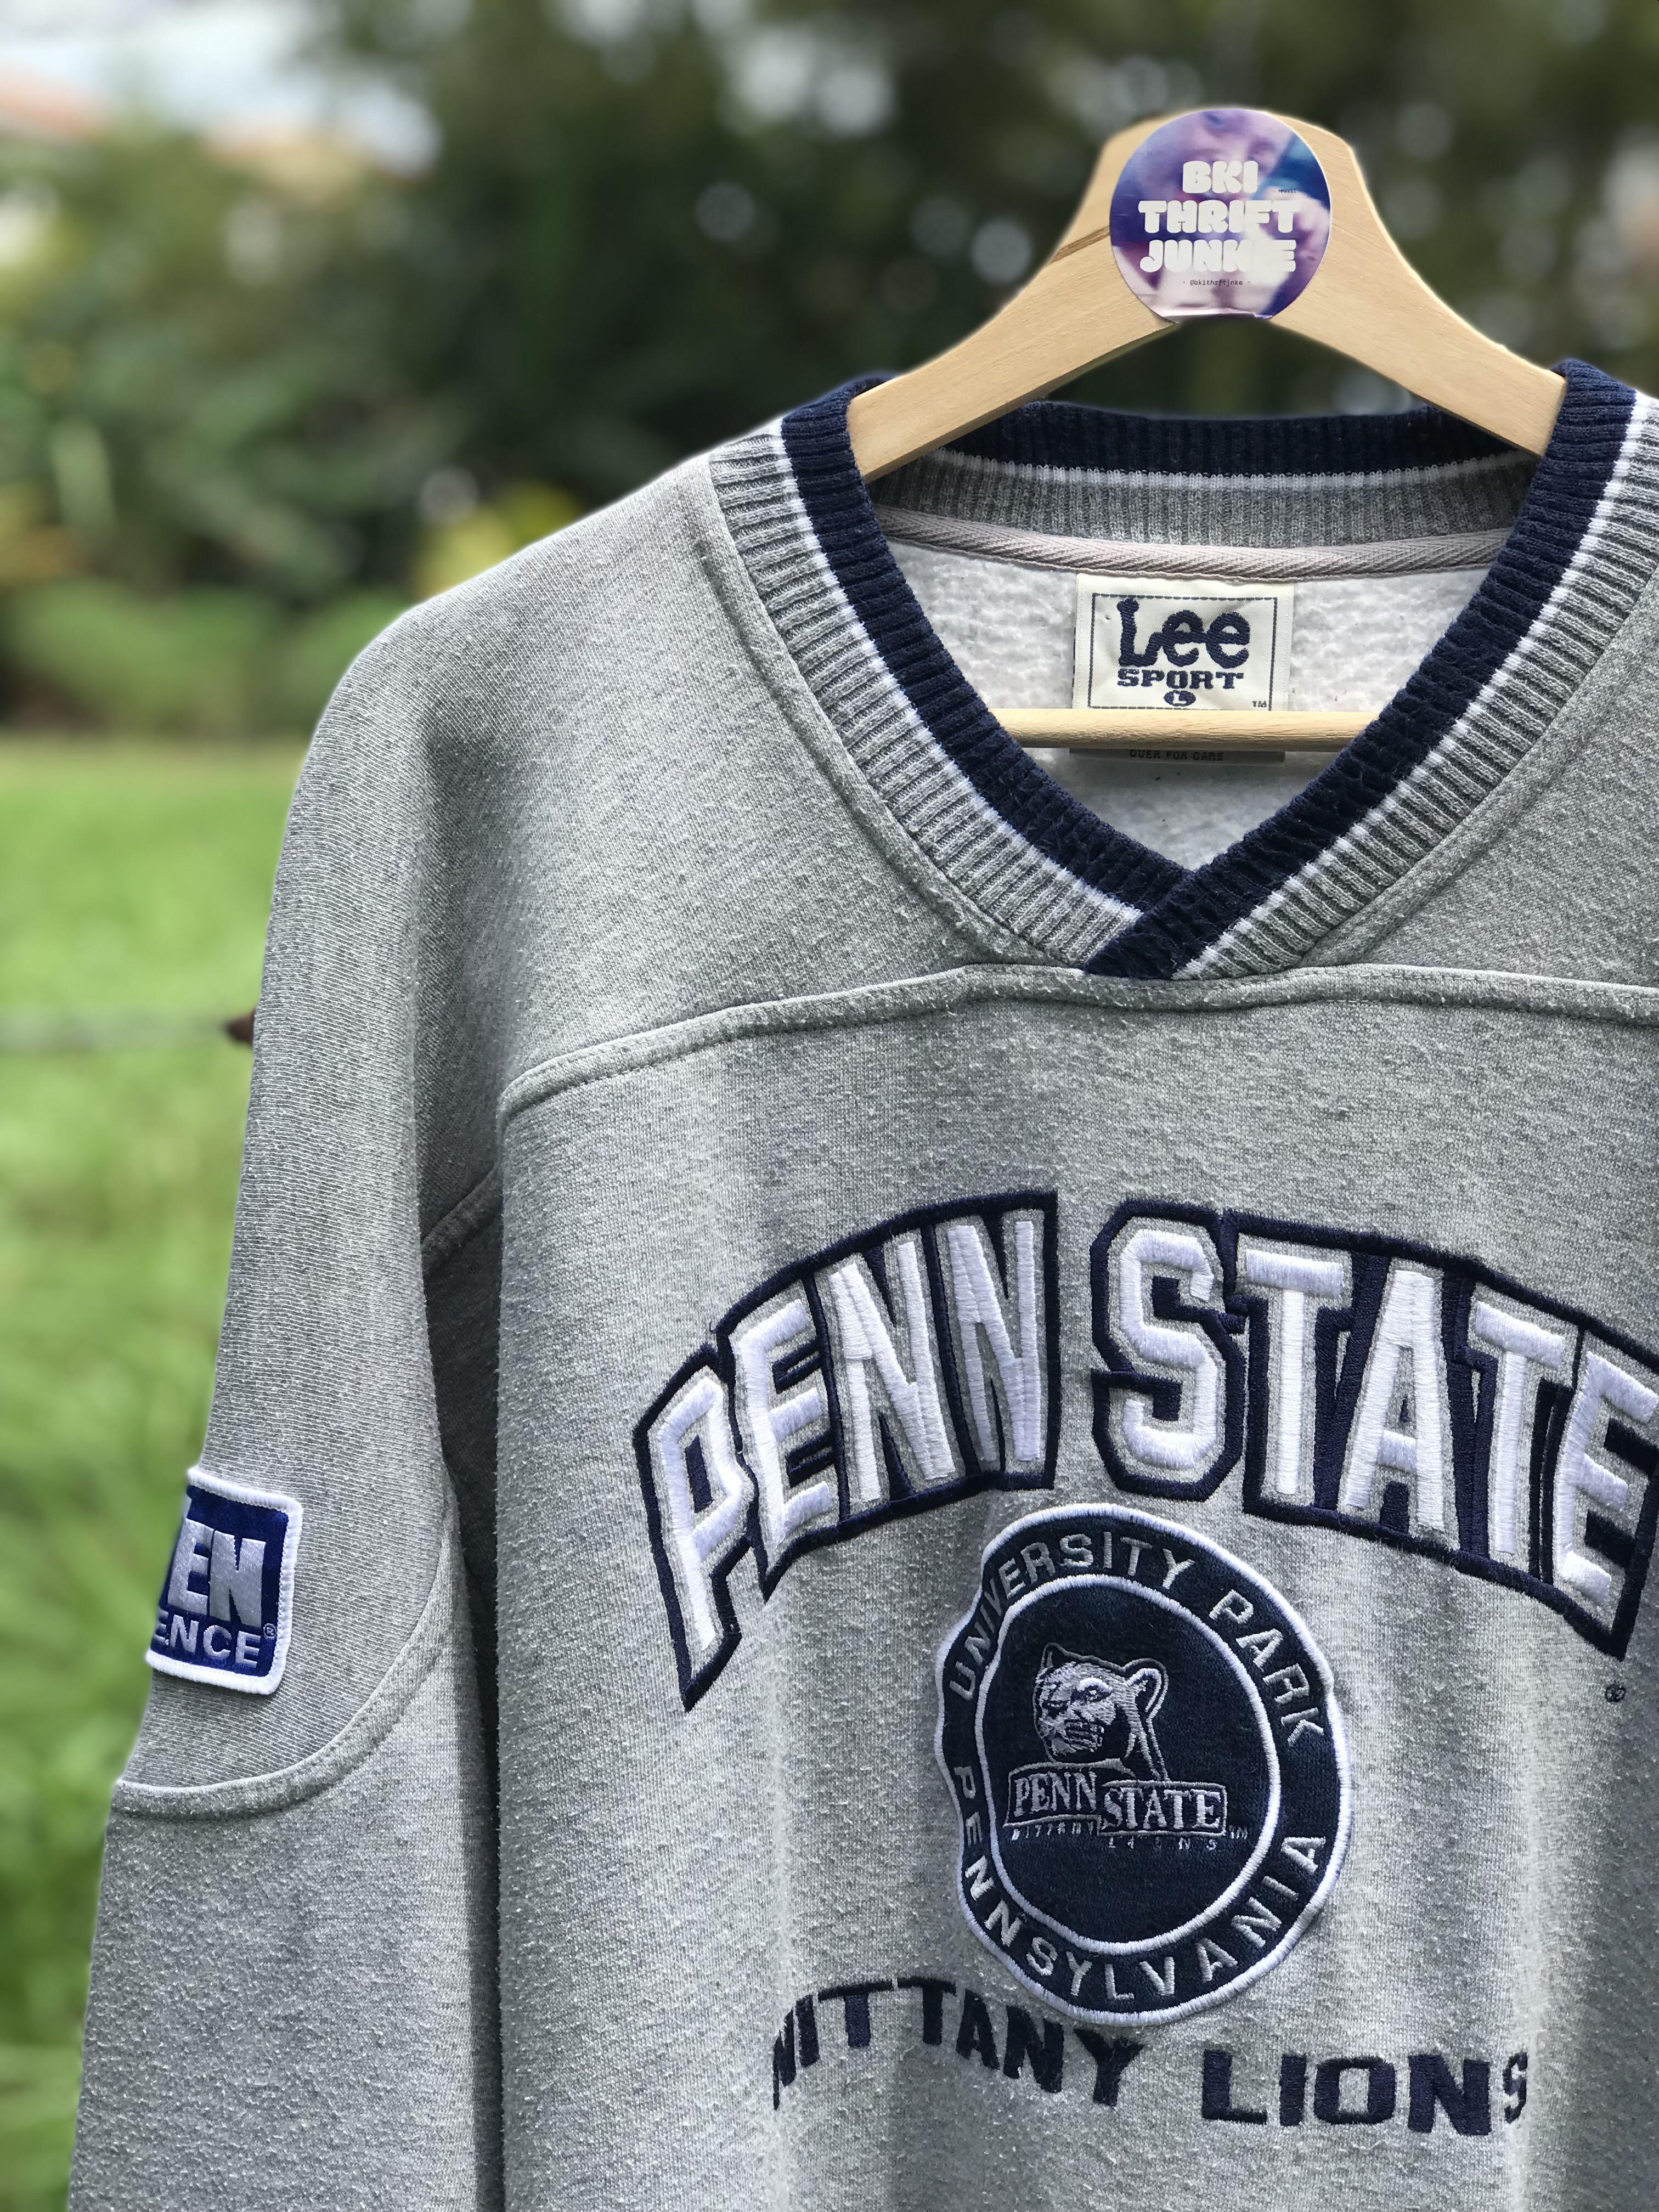 Vintage 90s Penn State Nittany Lions Sweatshirt Size XL – Thrift